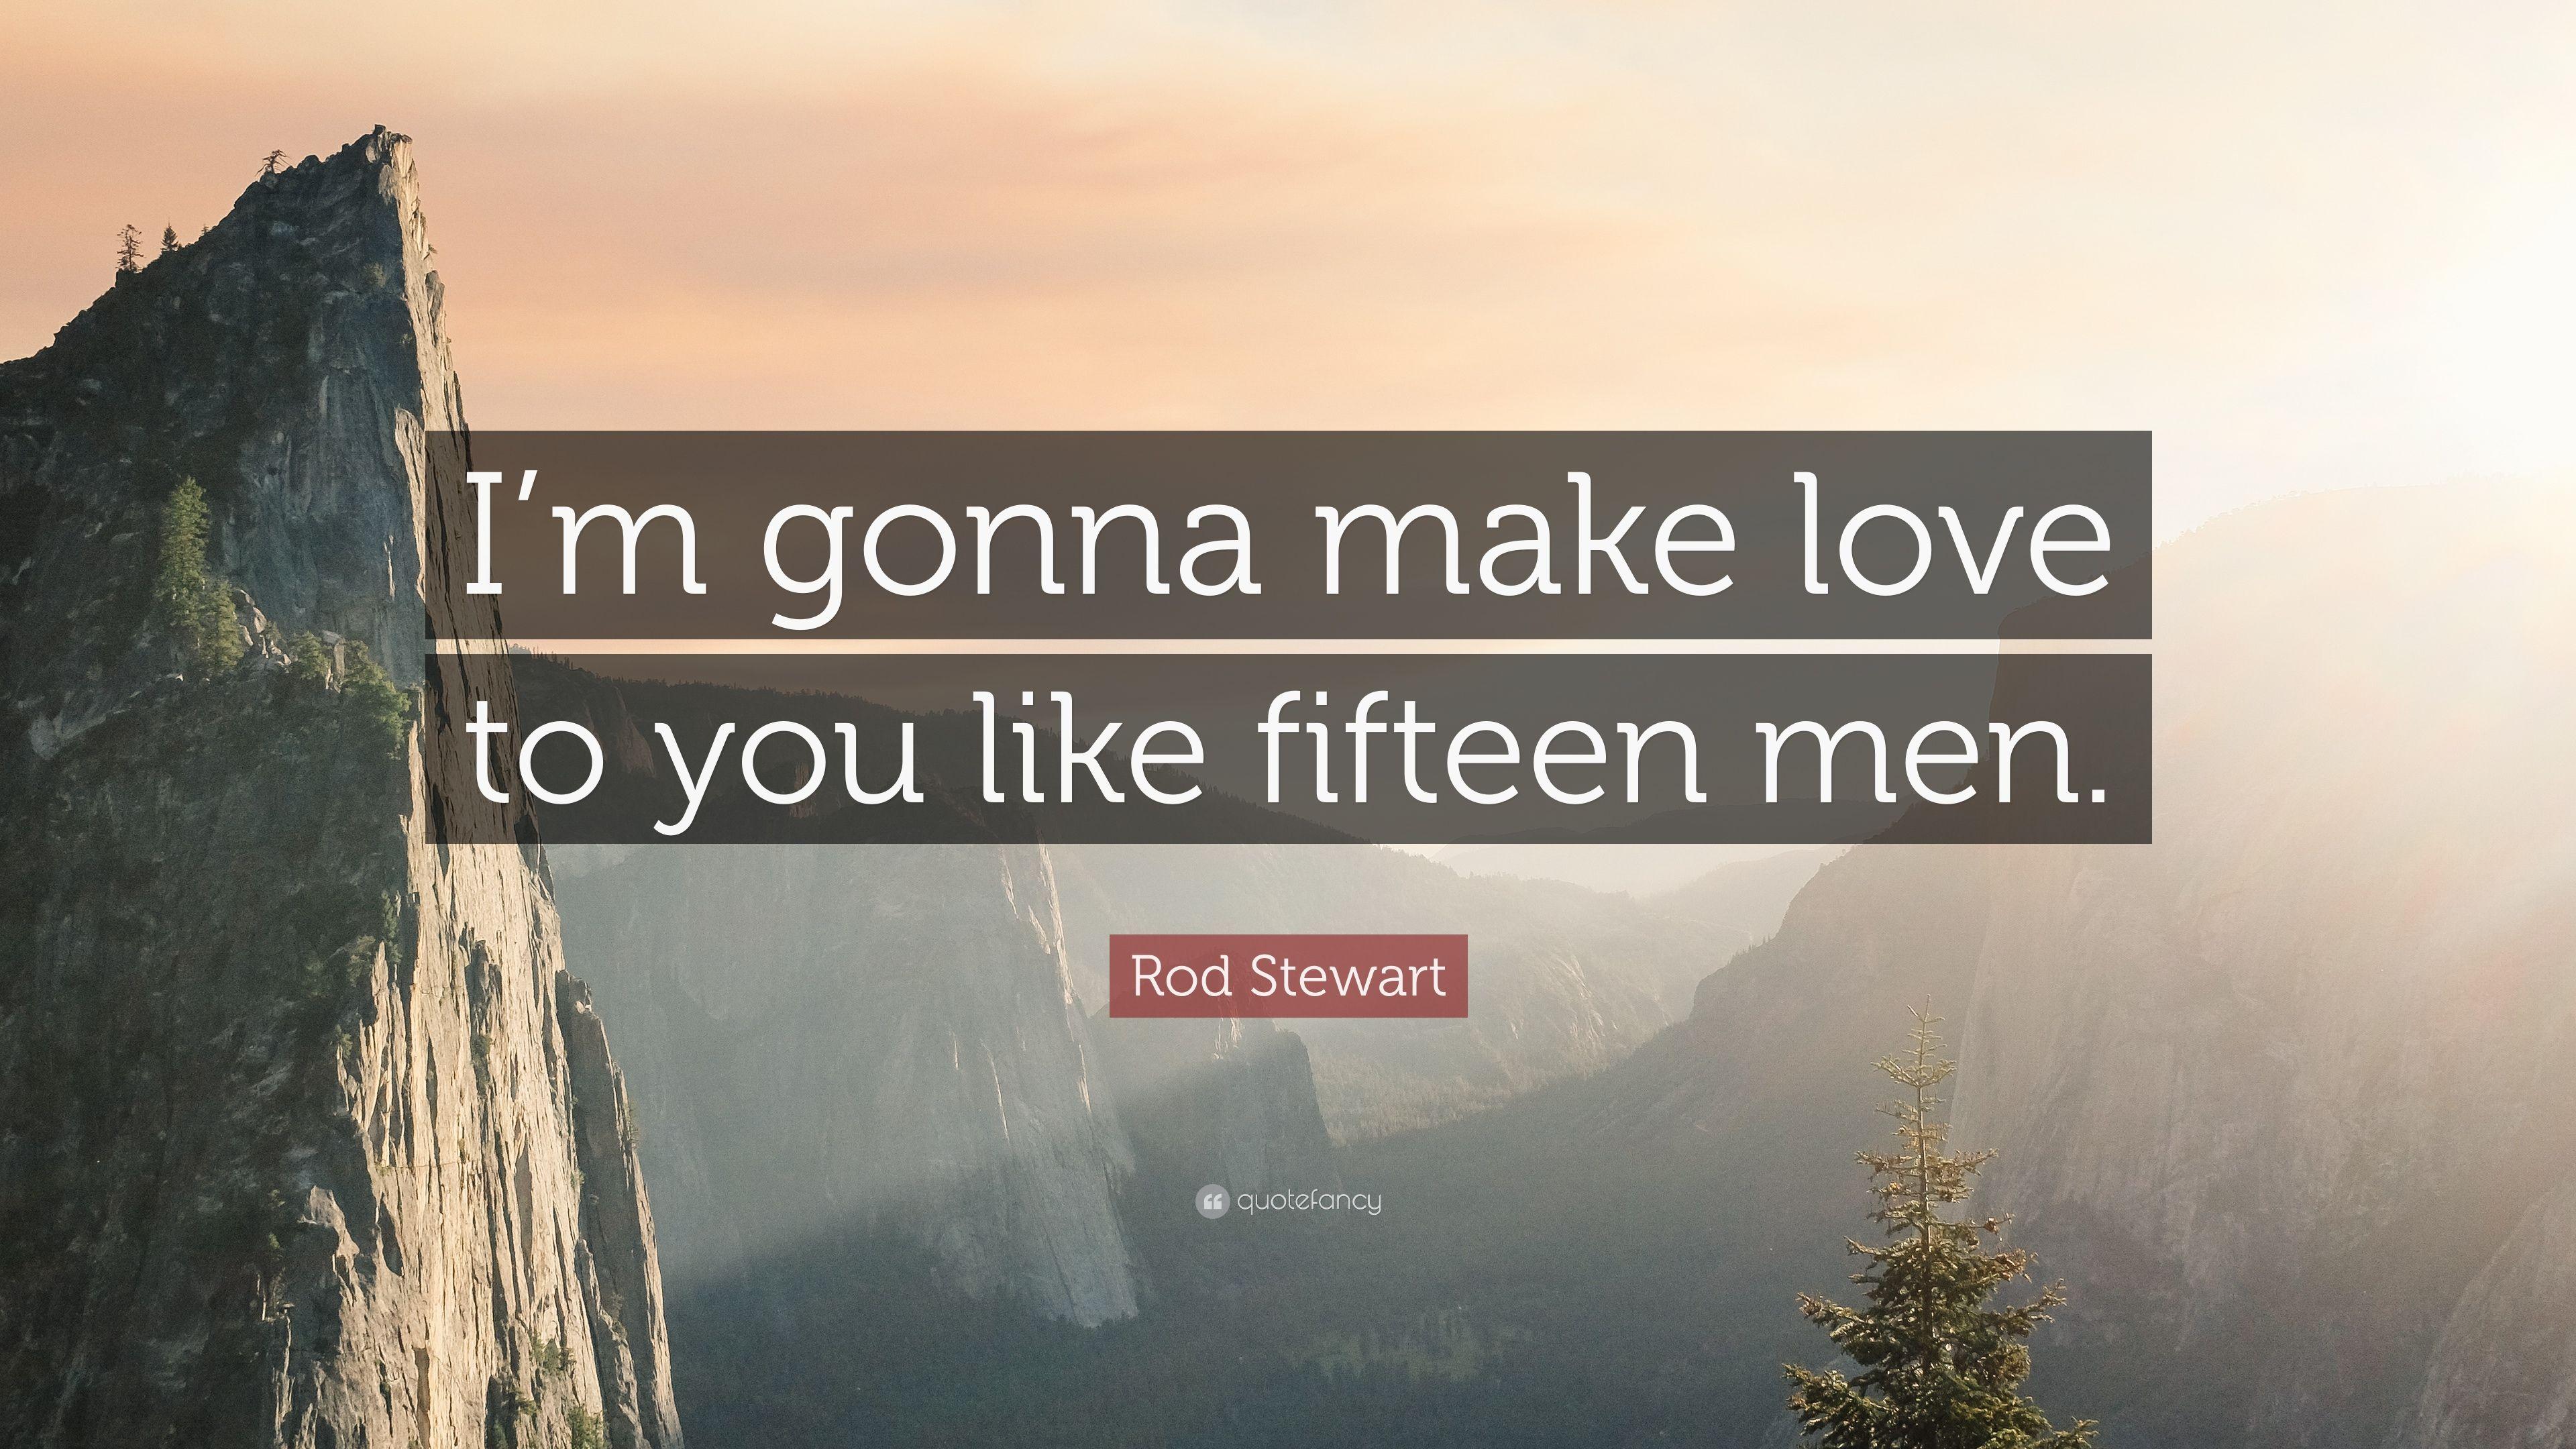 Rod Stewart Quote: “I'm gonna make love to you like fifteen men